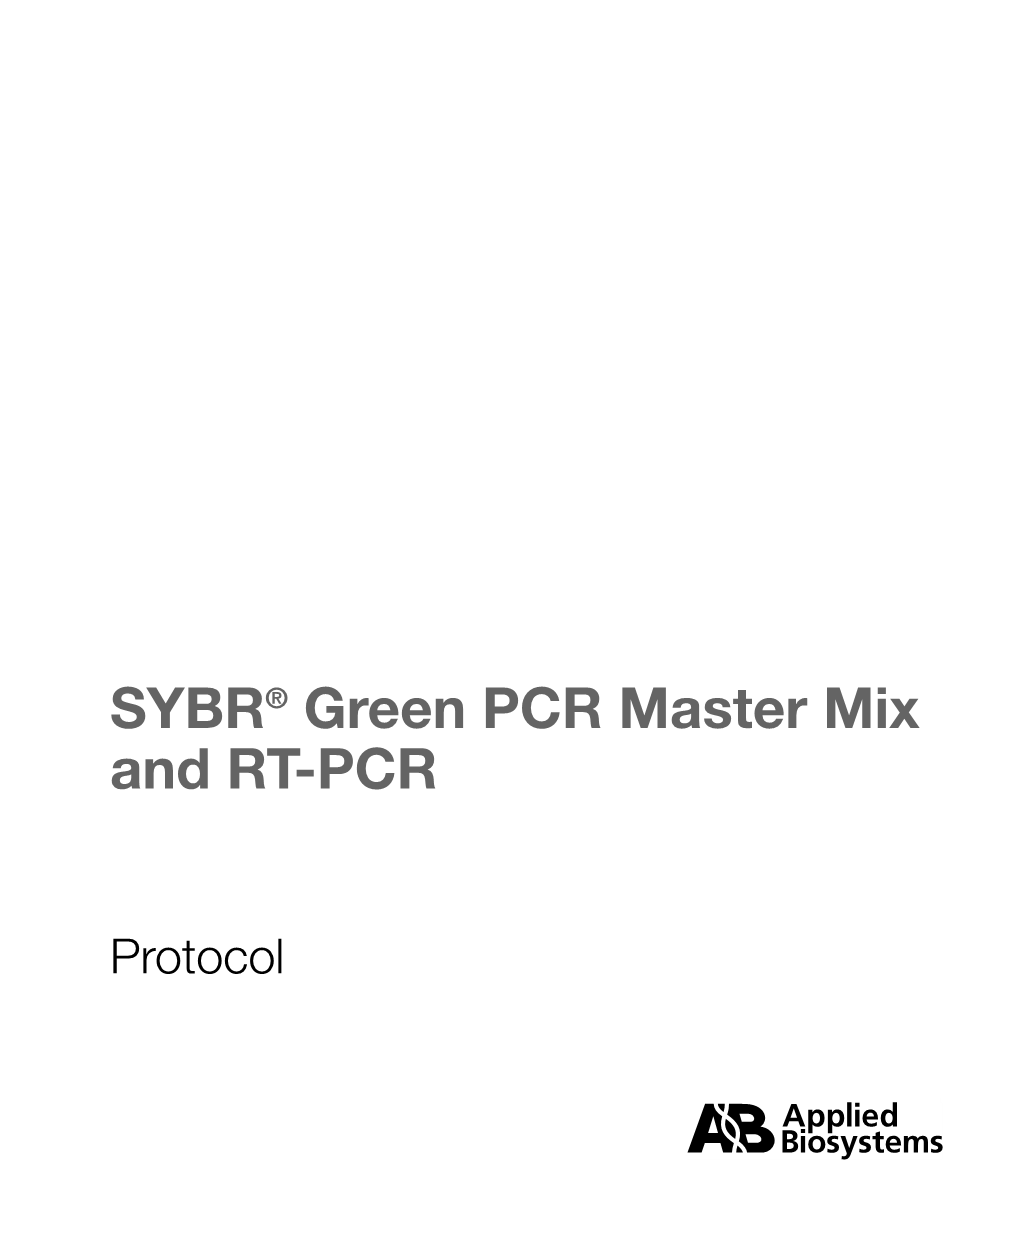 SYBR® Green PCR Master Mix and RT-PCR